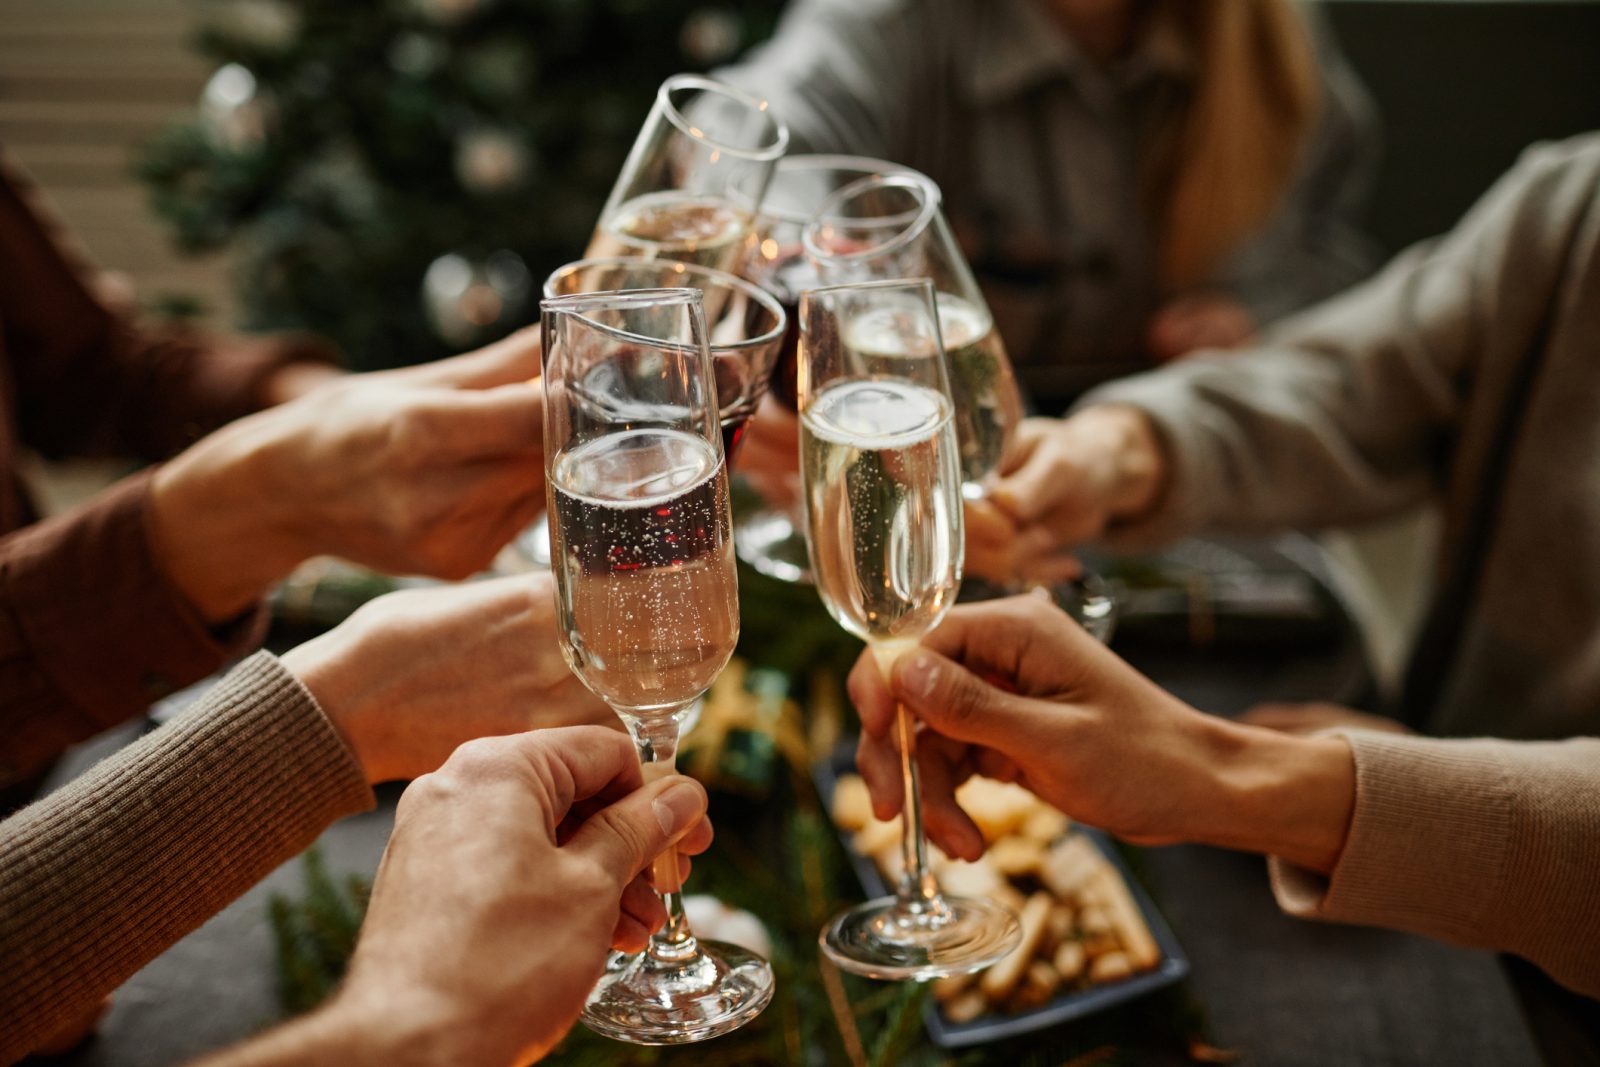 A group of six people toast with flutes of sparkling wine.